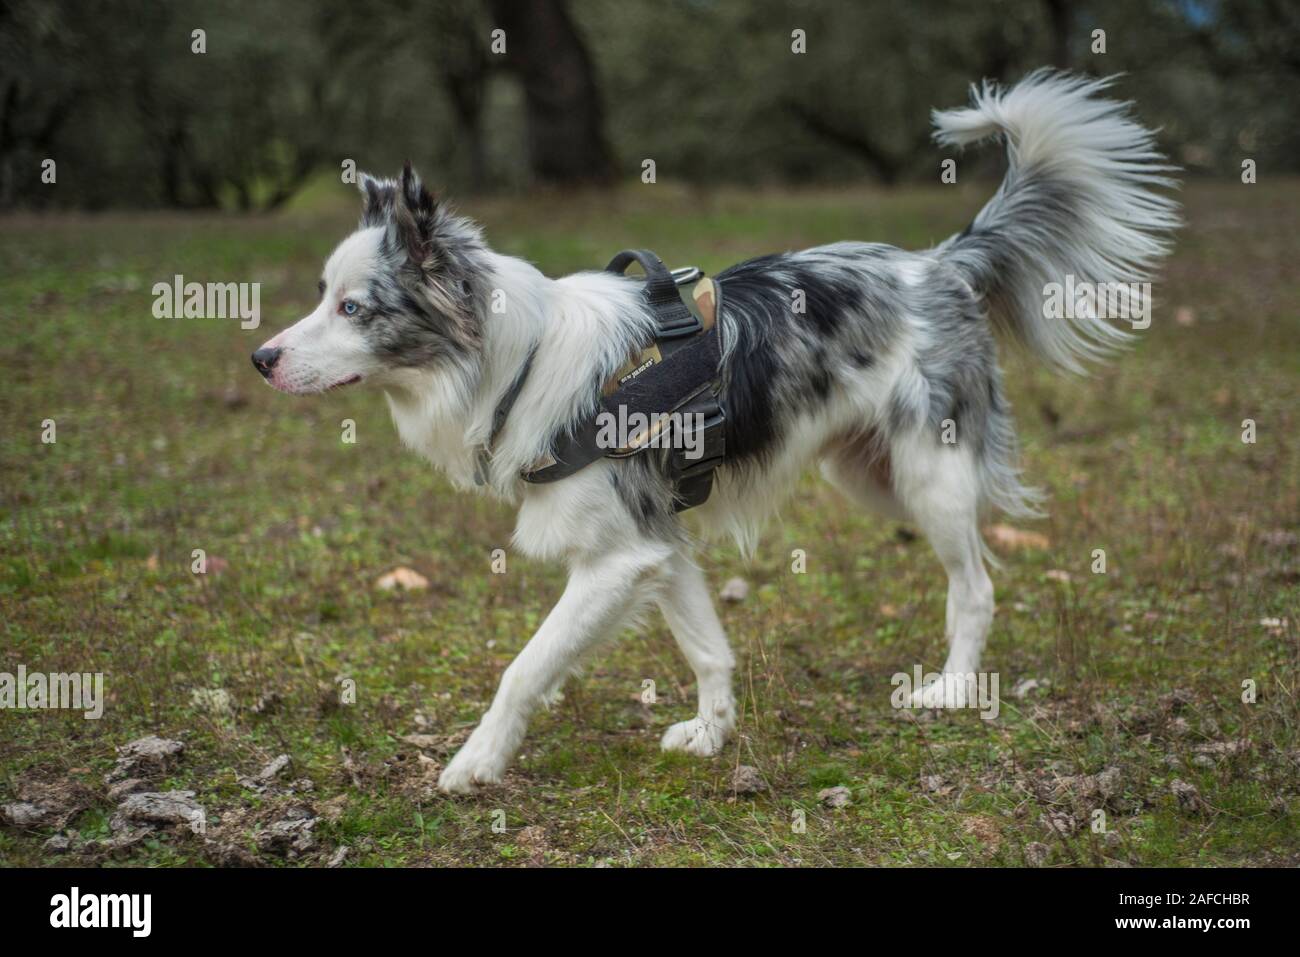 Merle With Collar High Resolution Stock Photography And Images Alamy